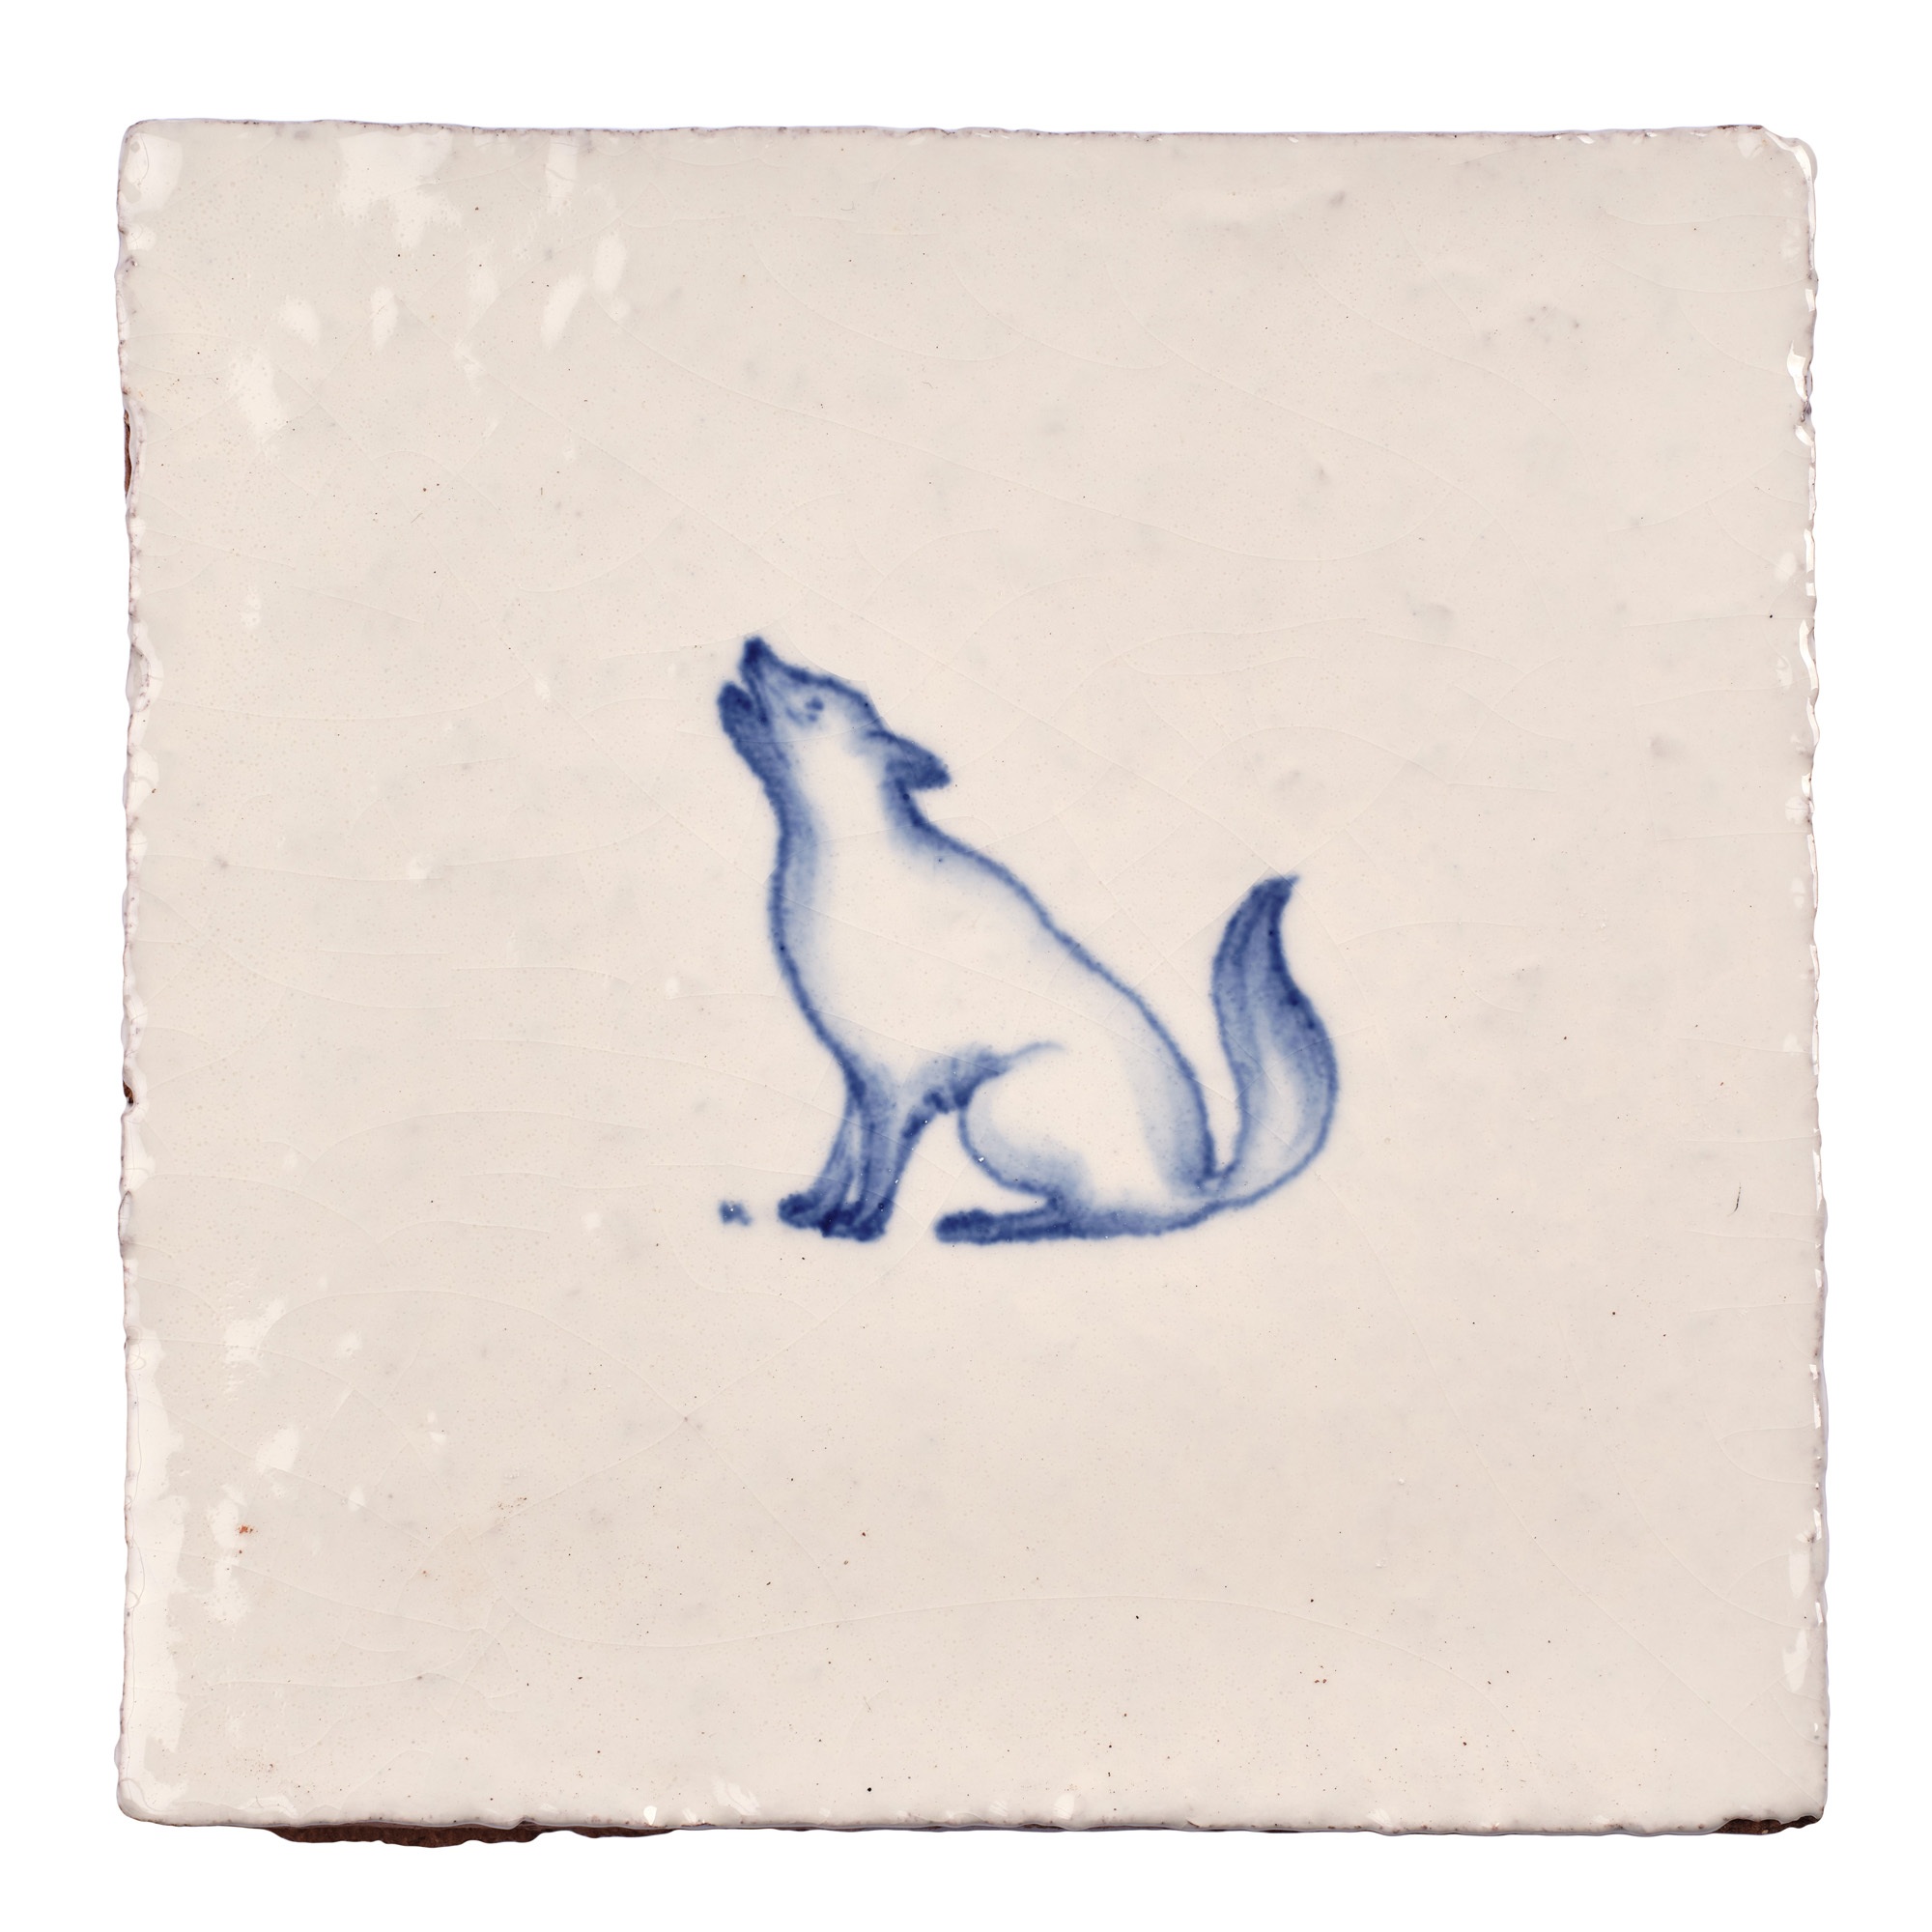 Wilding Wolf Square, product variant image